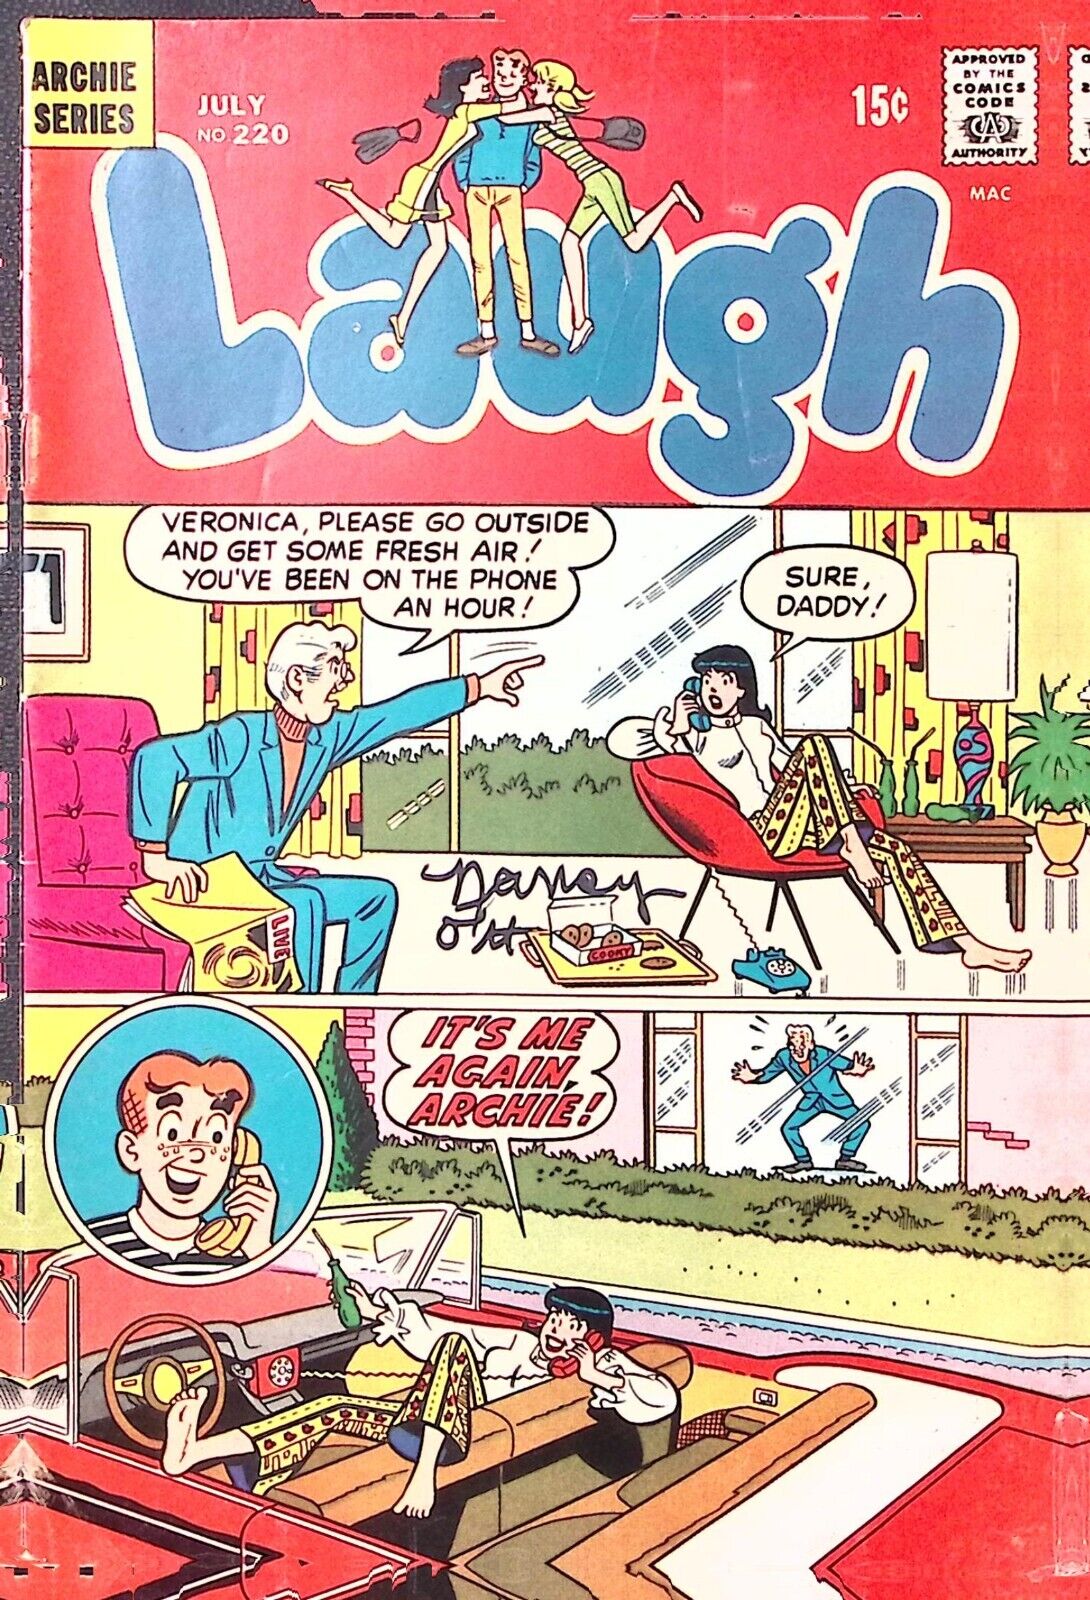 1969 ARCHIE SERIES LAUGH #220 JULY CRASH MOOSE BREAK UP BETTY AND VERONIC Z2363